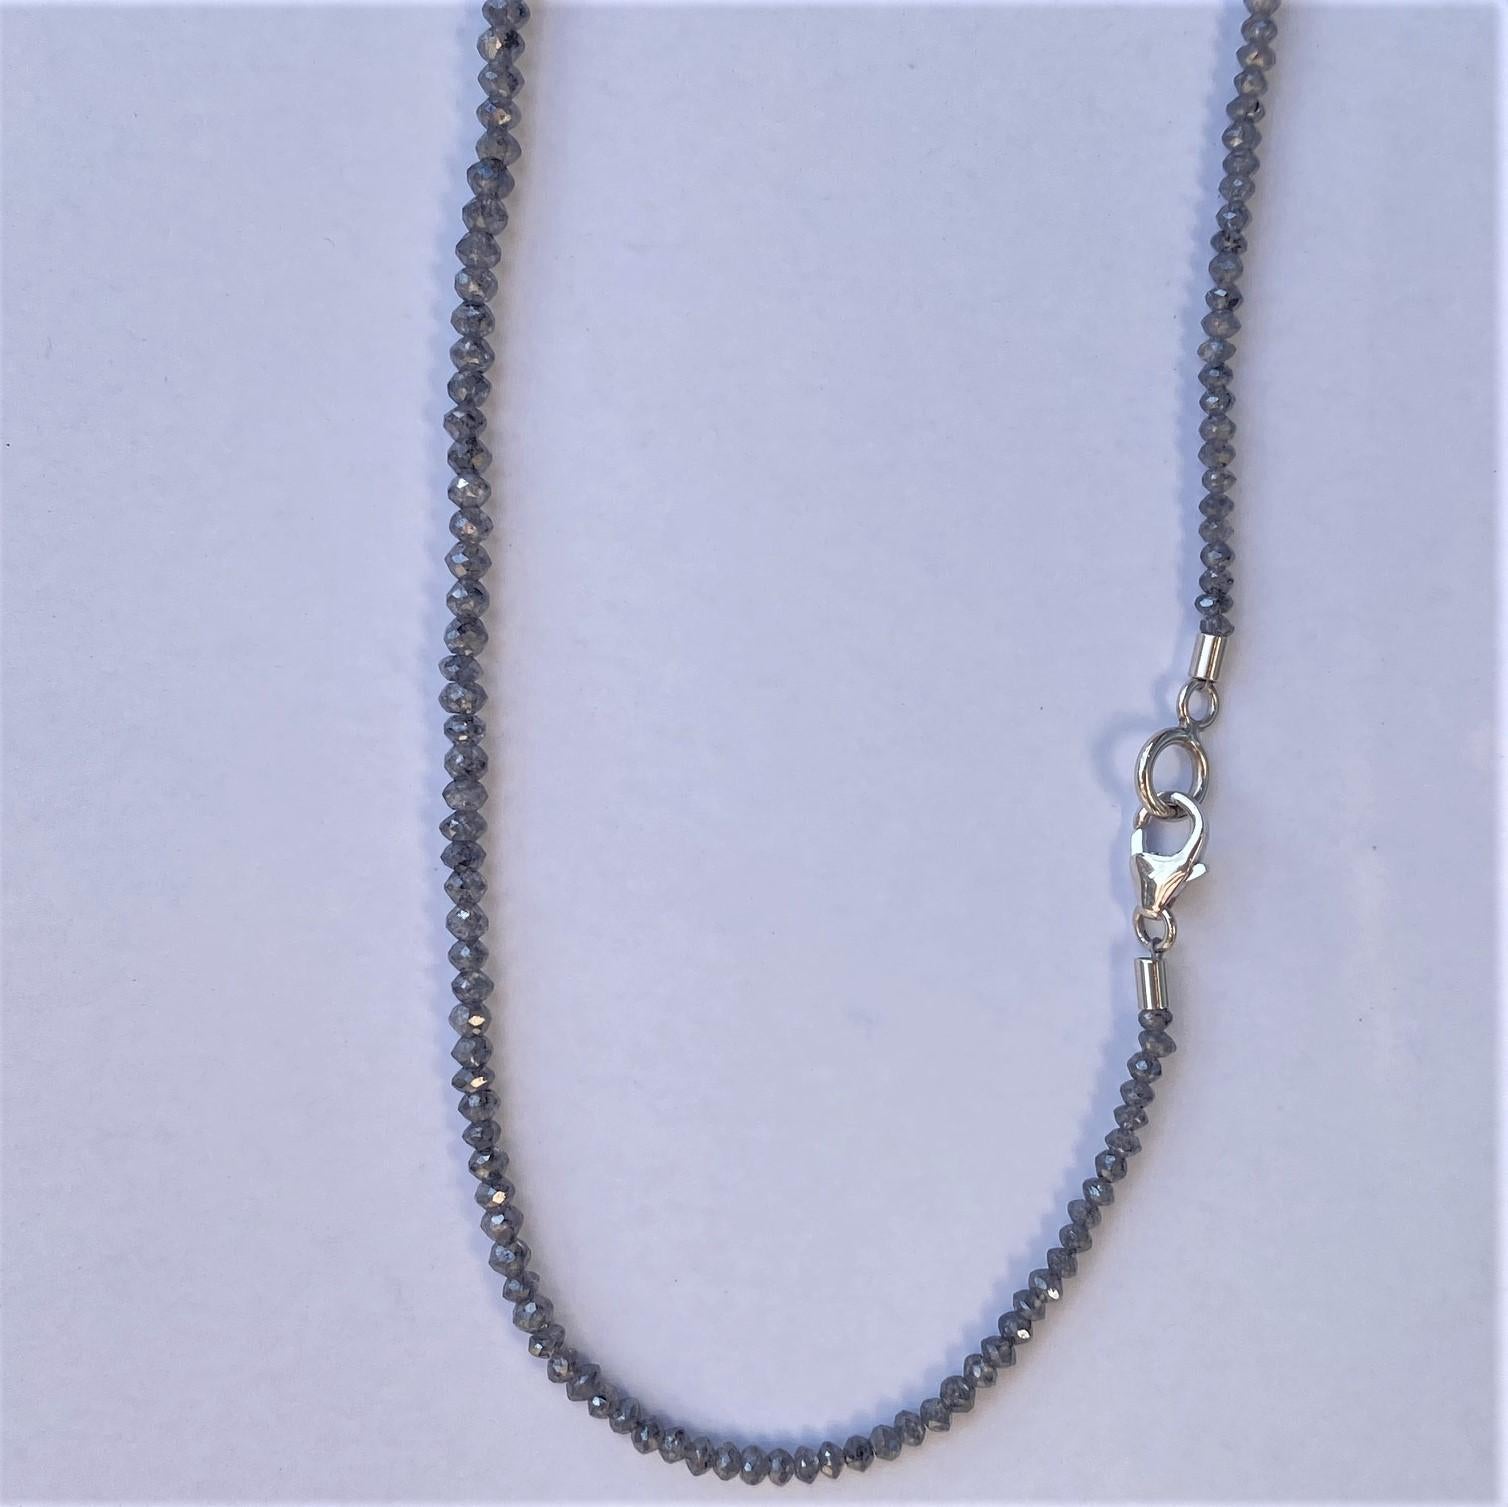 Contemporary Steel Grey Diamond Necklace with White Gold Clasp